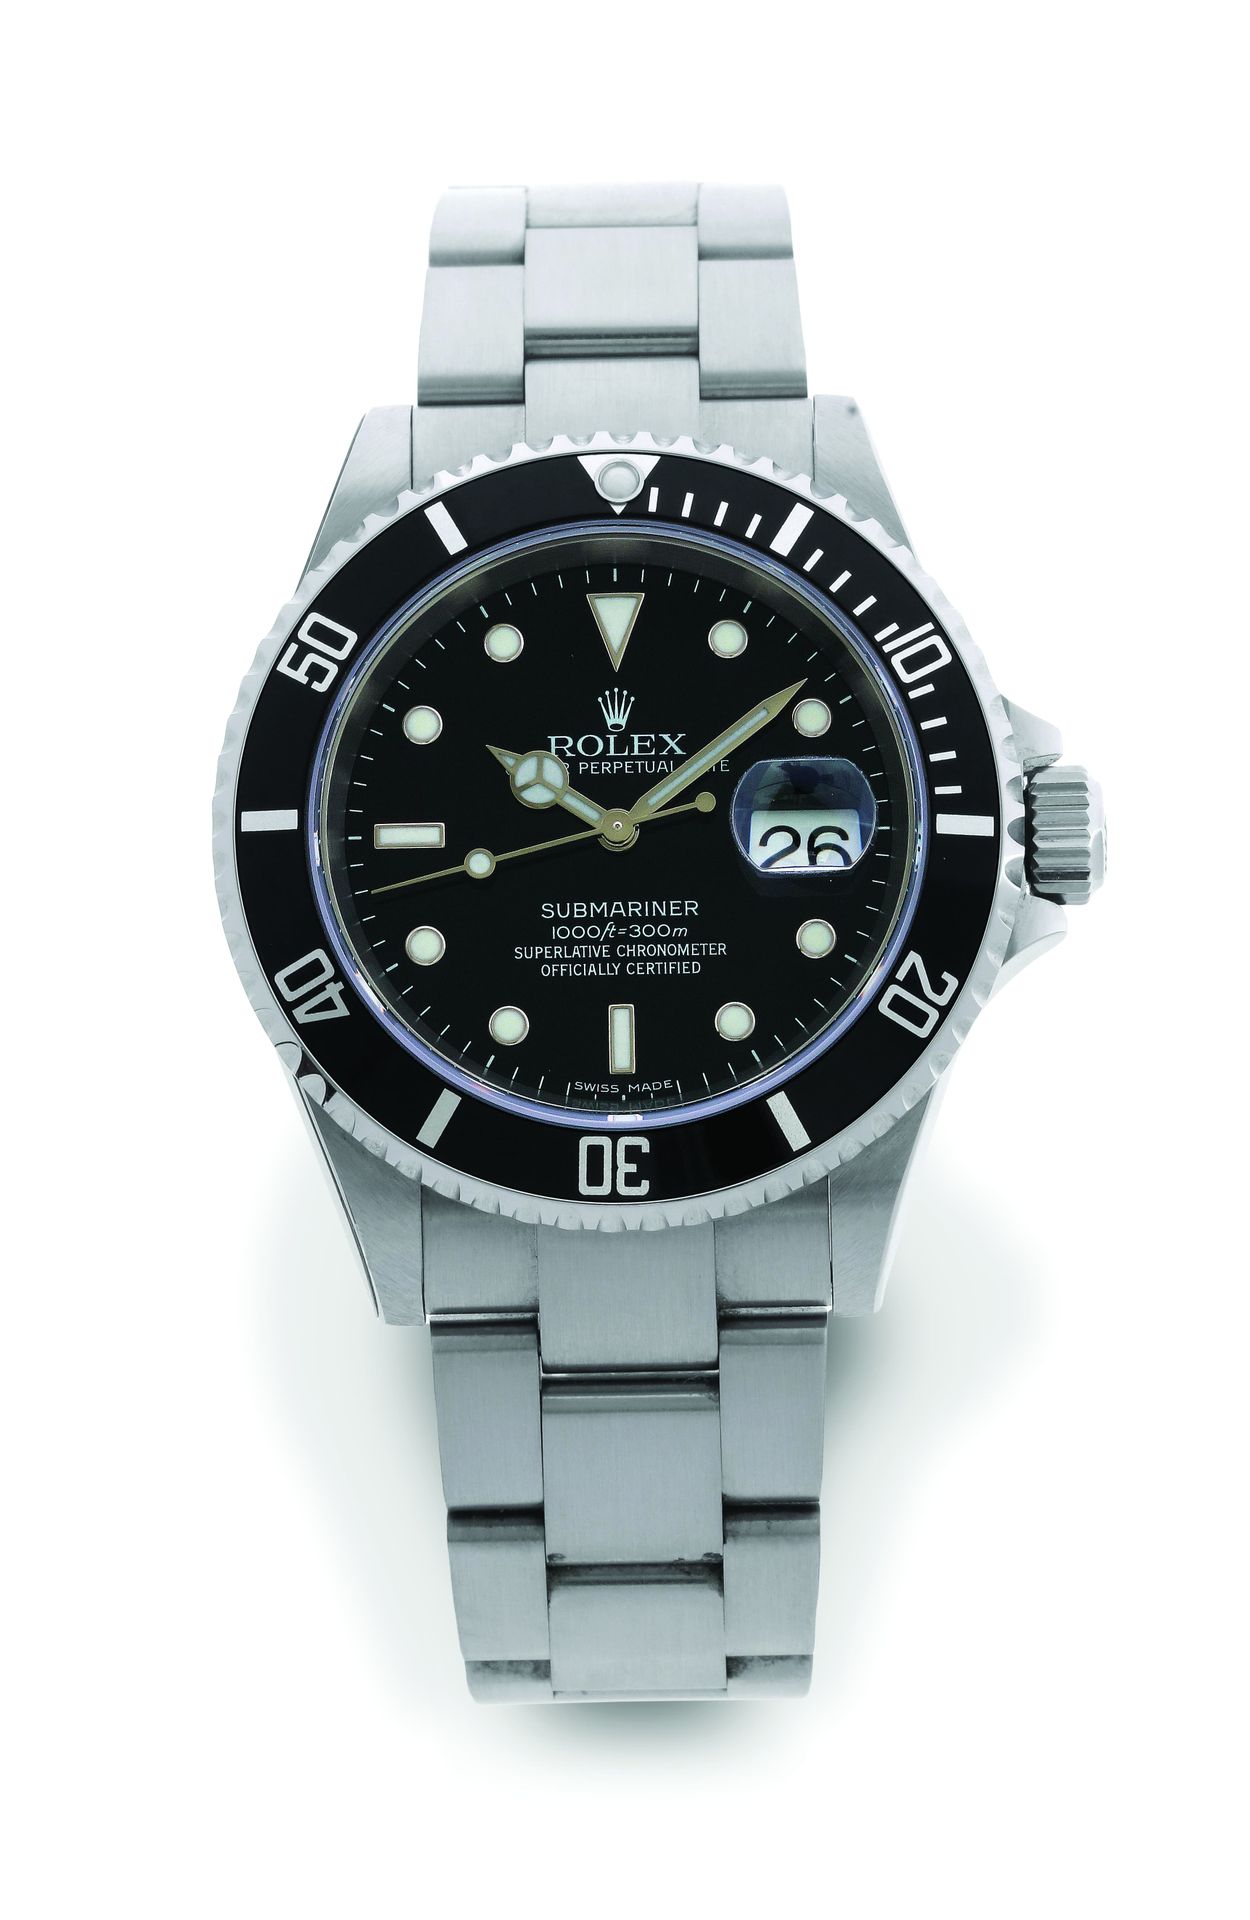 ROLEX Oyster Perpetual Submariner Date
Referenza 16610 T
Orologio subacqueo in a&hellip;